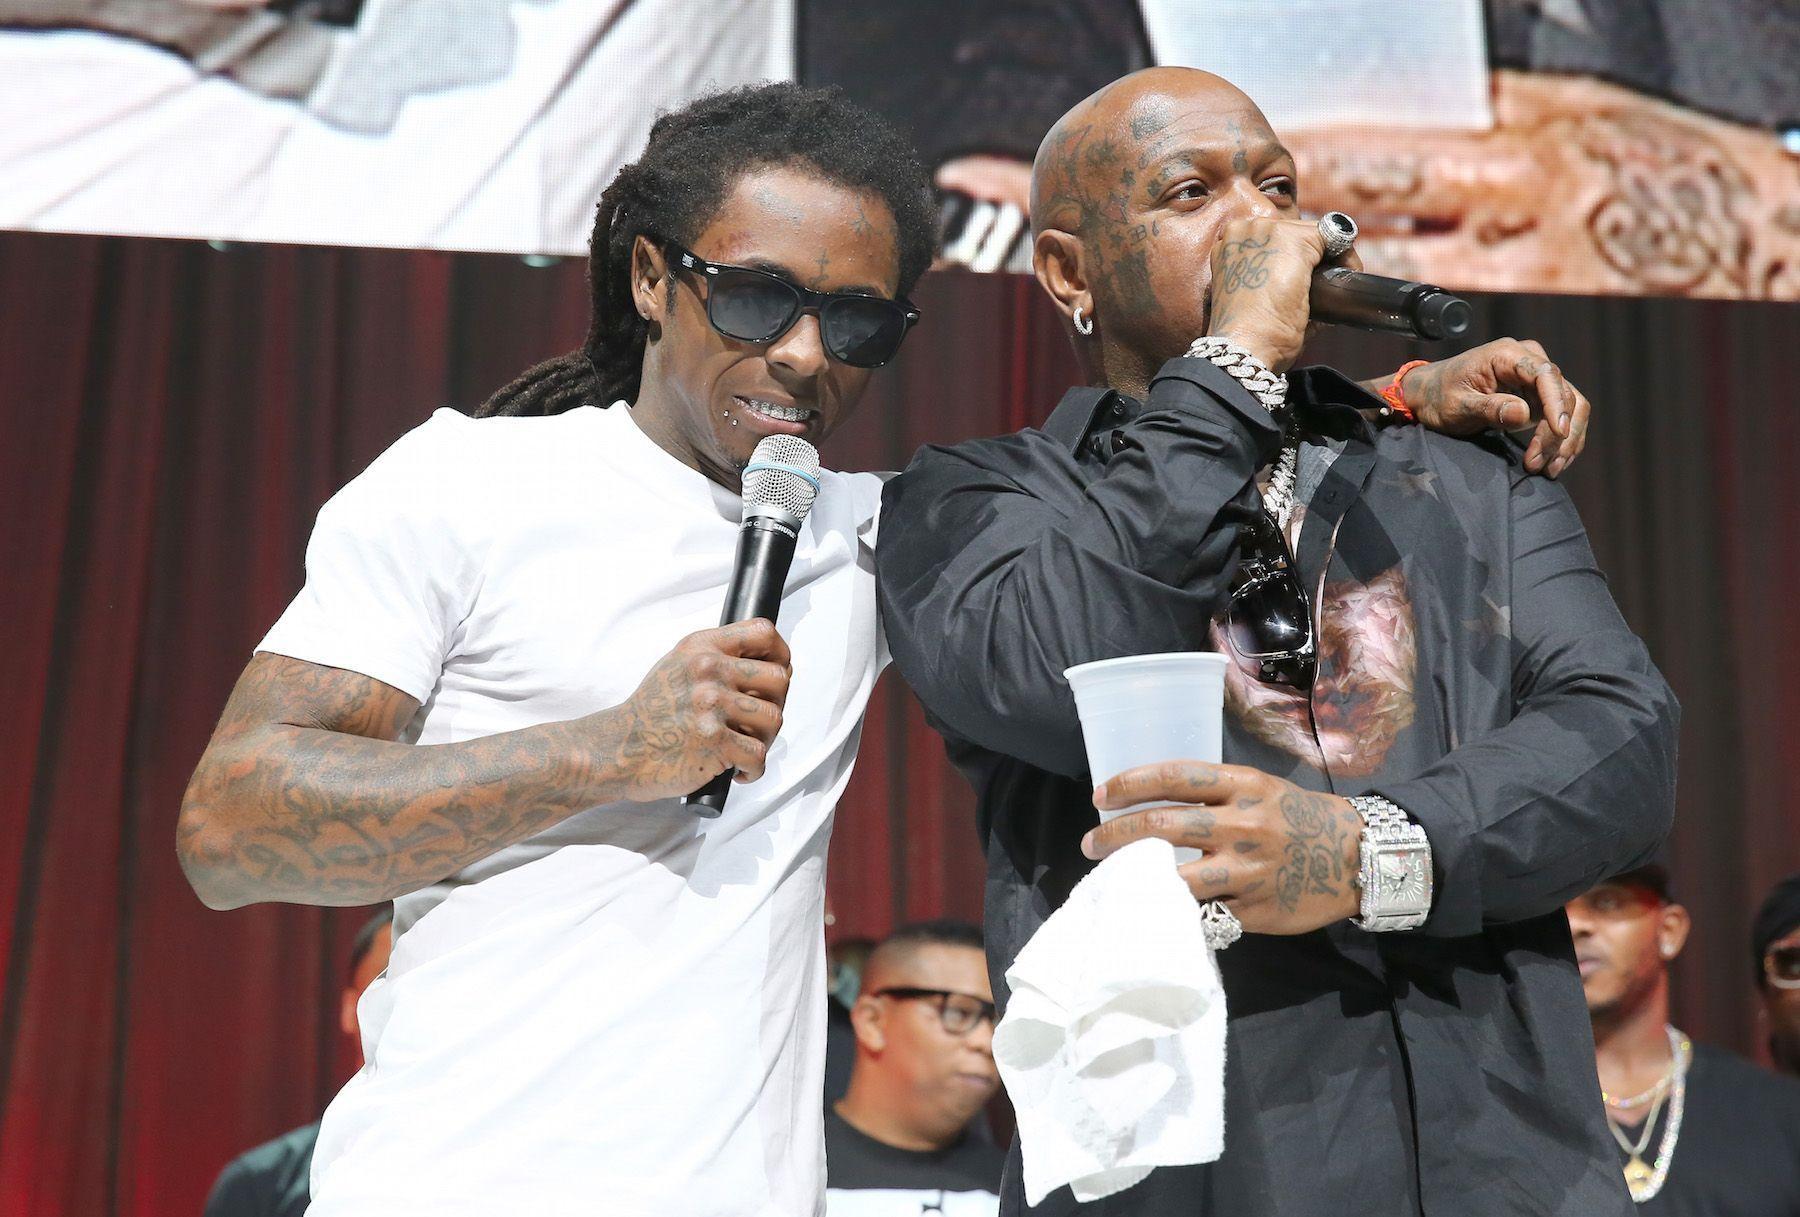 Cheers To 2016: Lil Wayne And Birdman Brought In The New Year Together